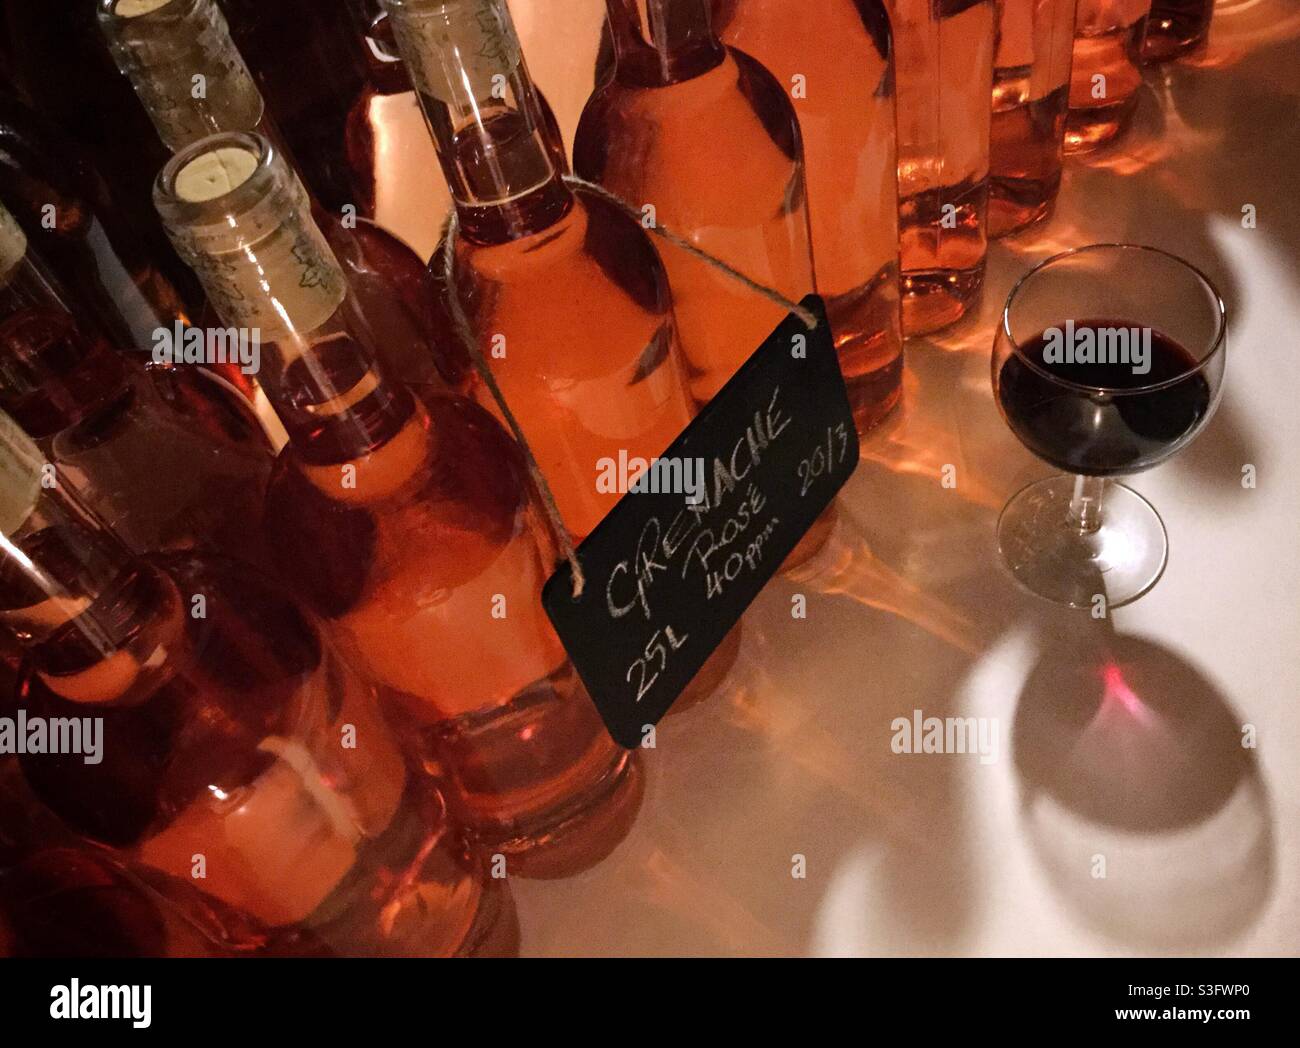 Bottle of Grenache rosé with a glass of Syrah wine, Catalonia, Spain. Stock Photo